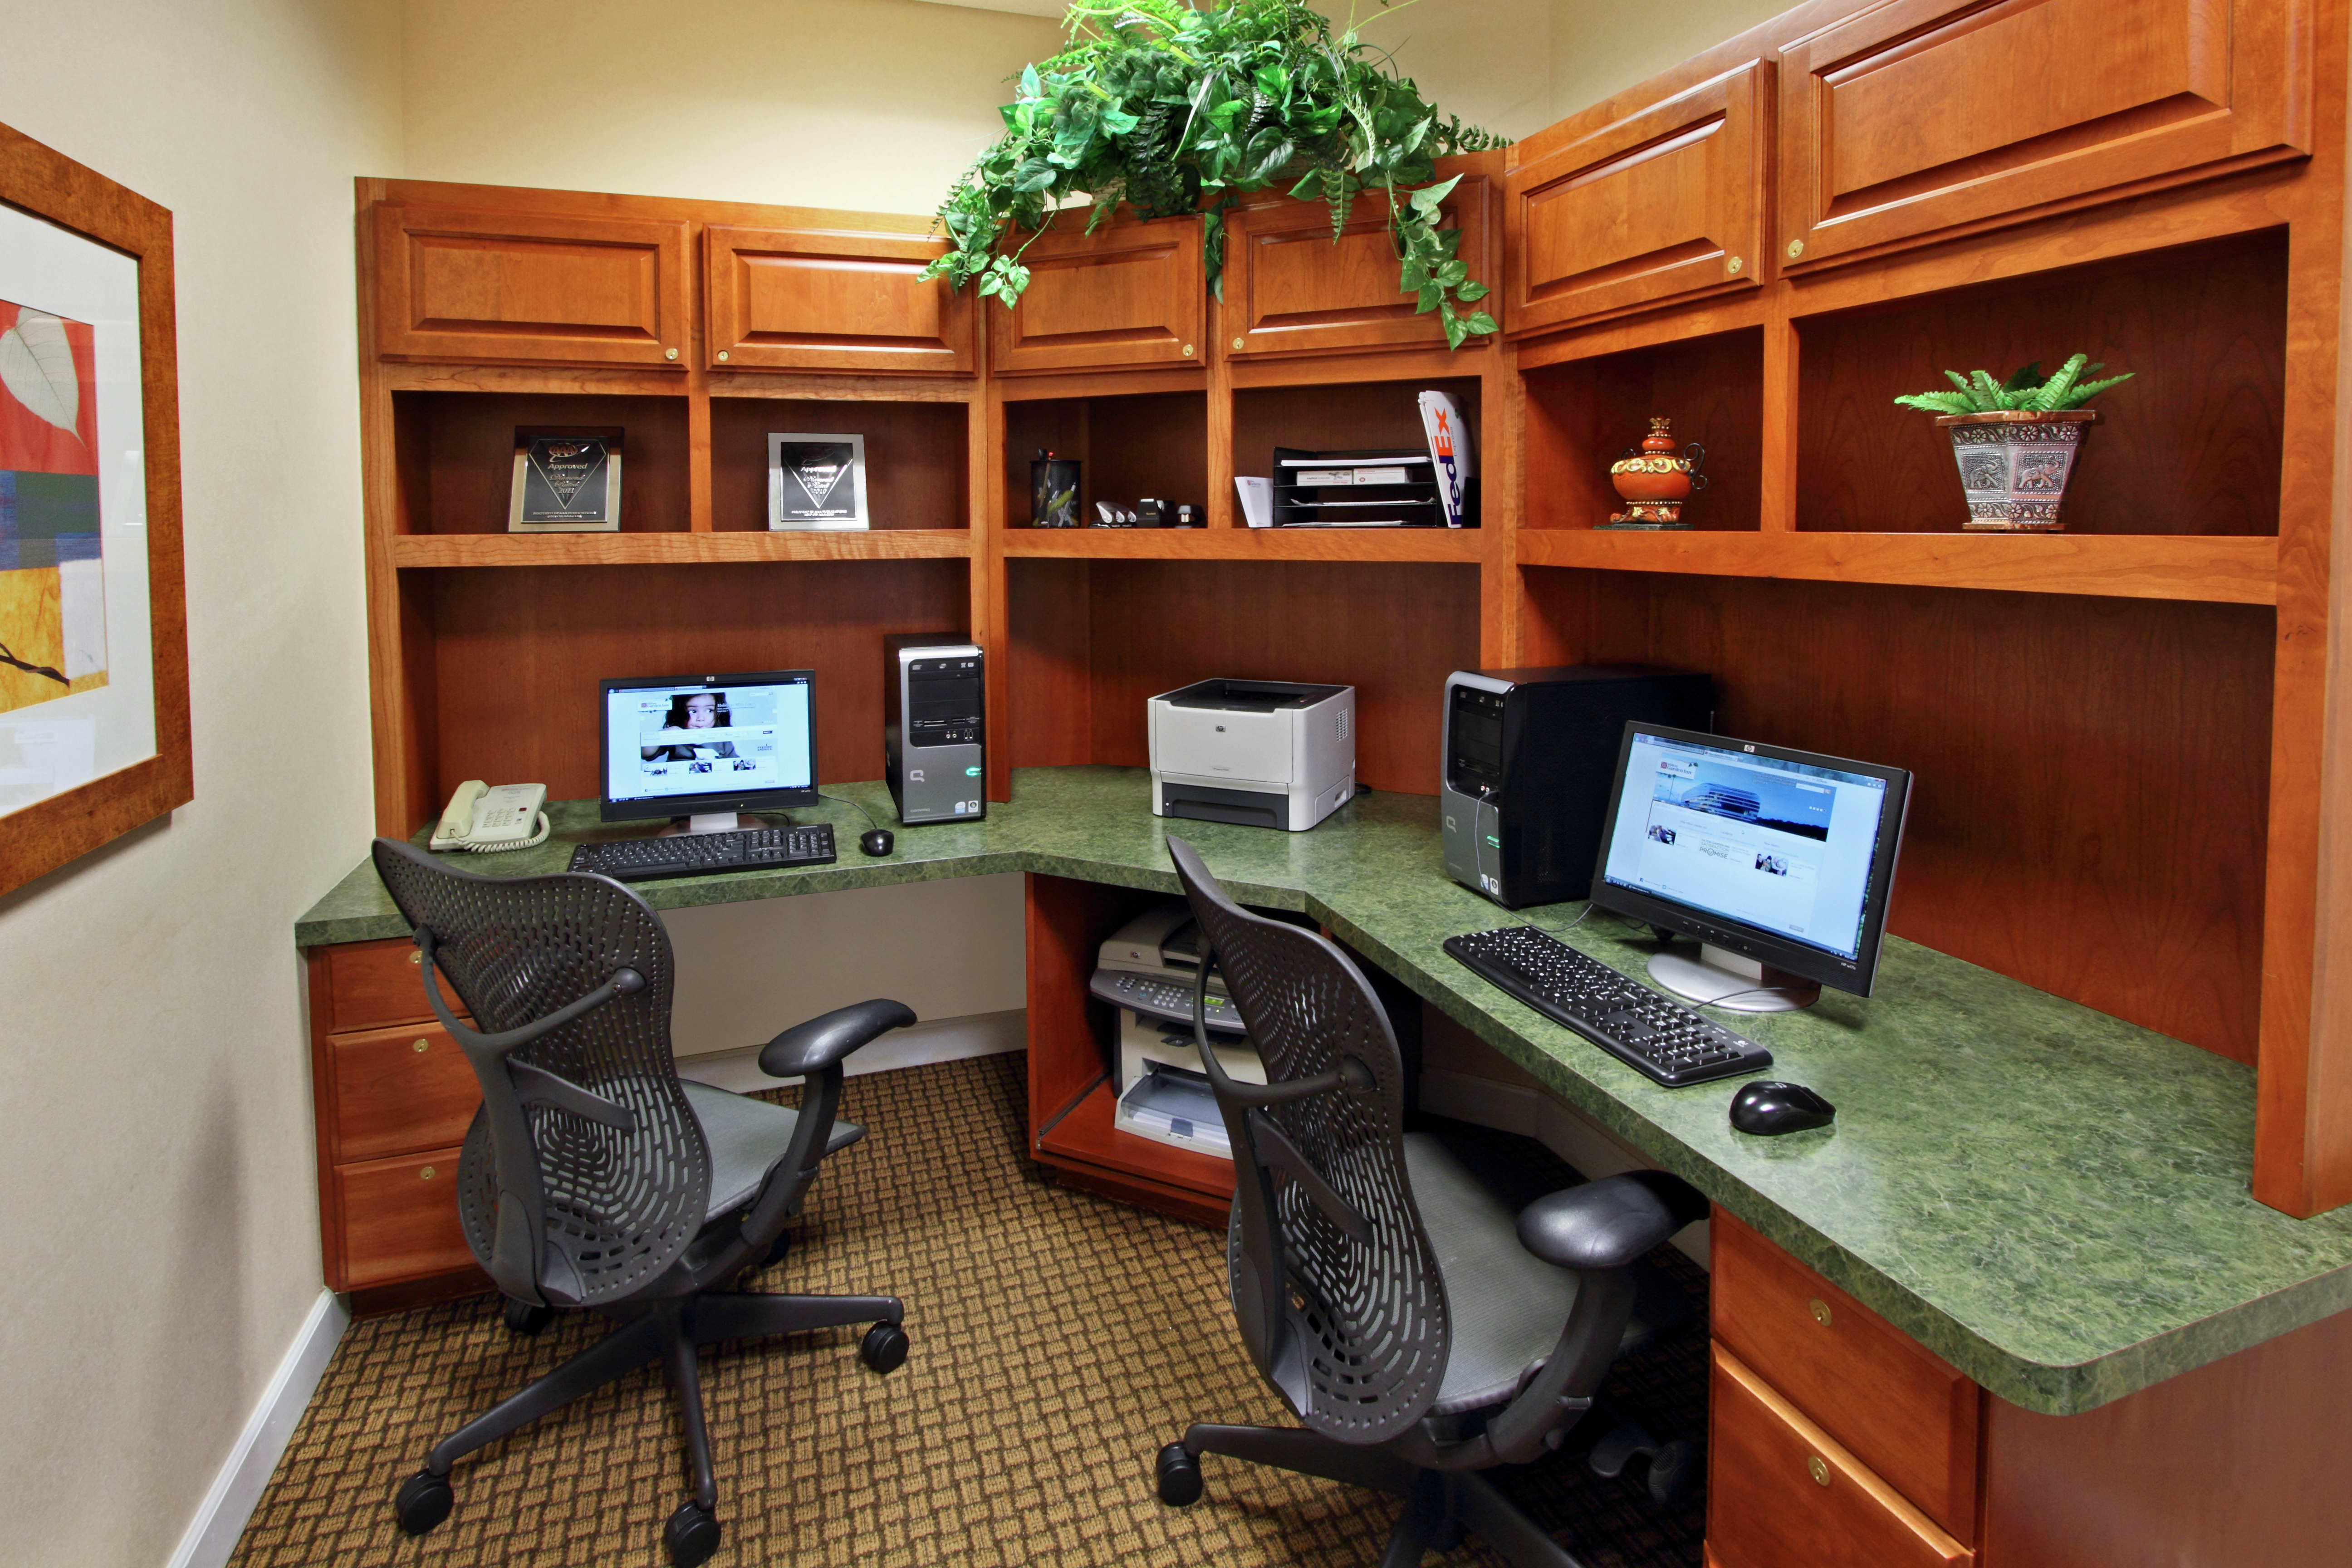 Business Center With Two Computer Workstations, Ergonomic Chairs, Printer, and Fax/Copier at Large Wooden Desk